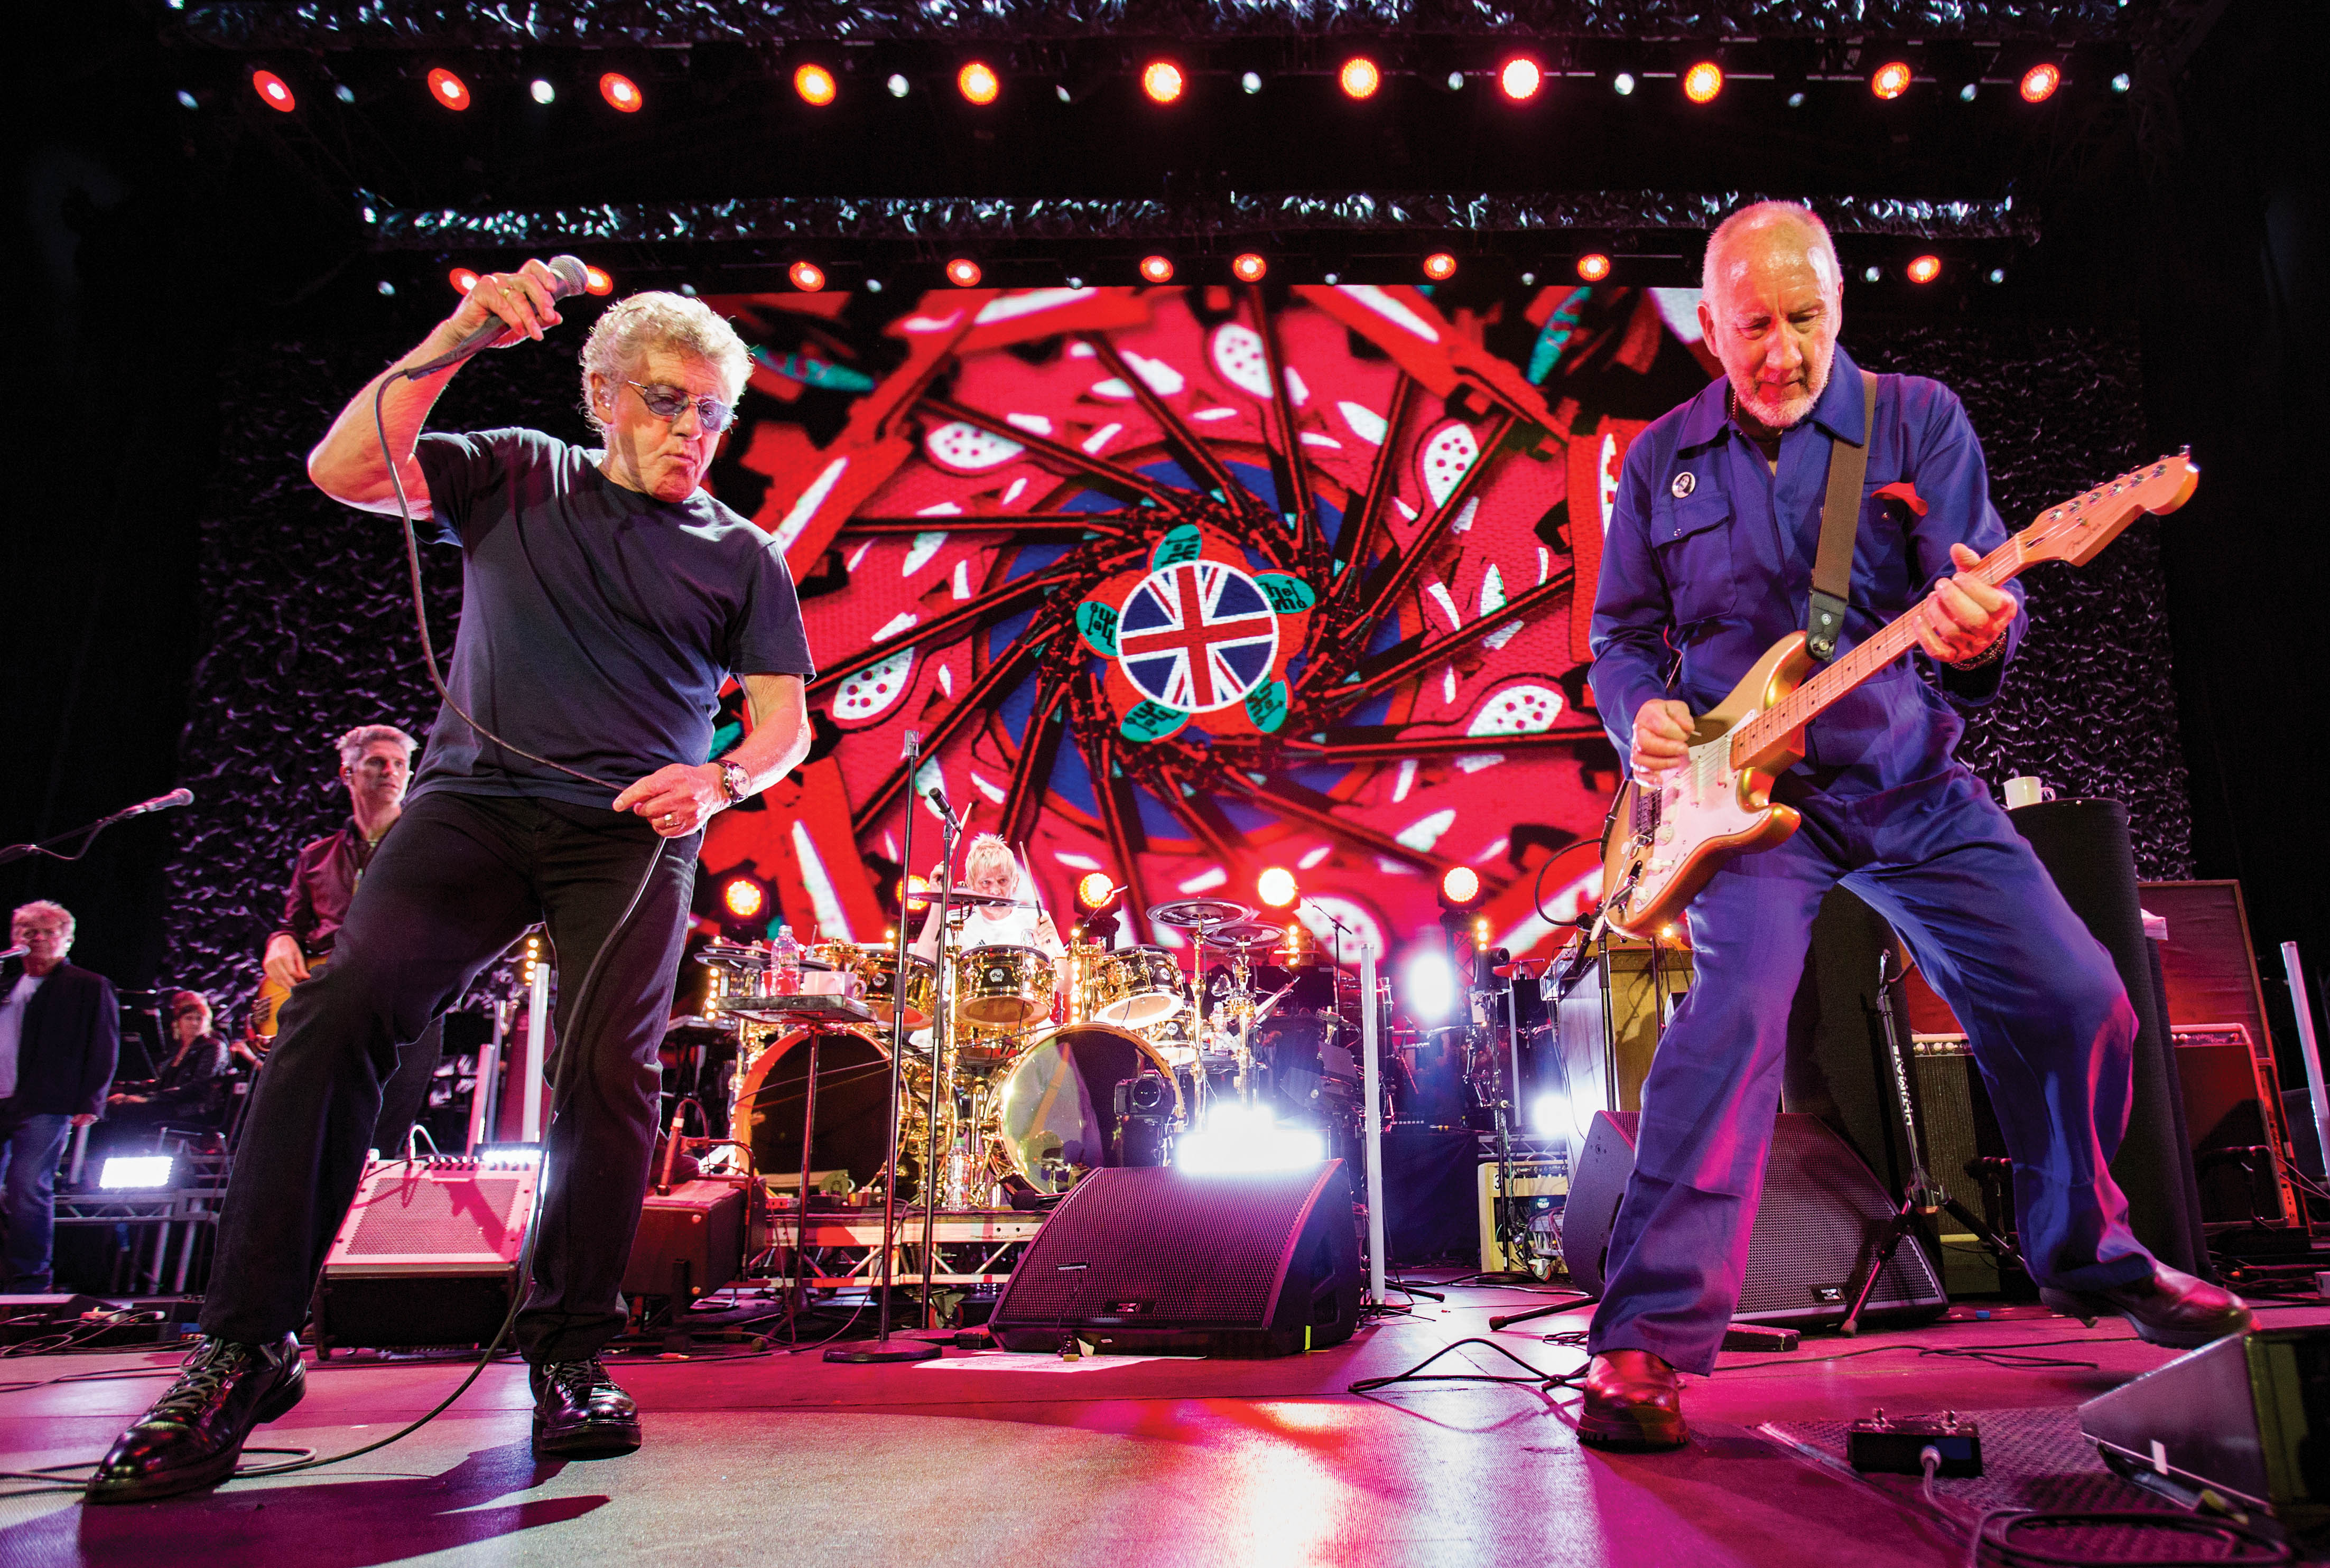 the who tour uk